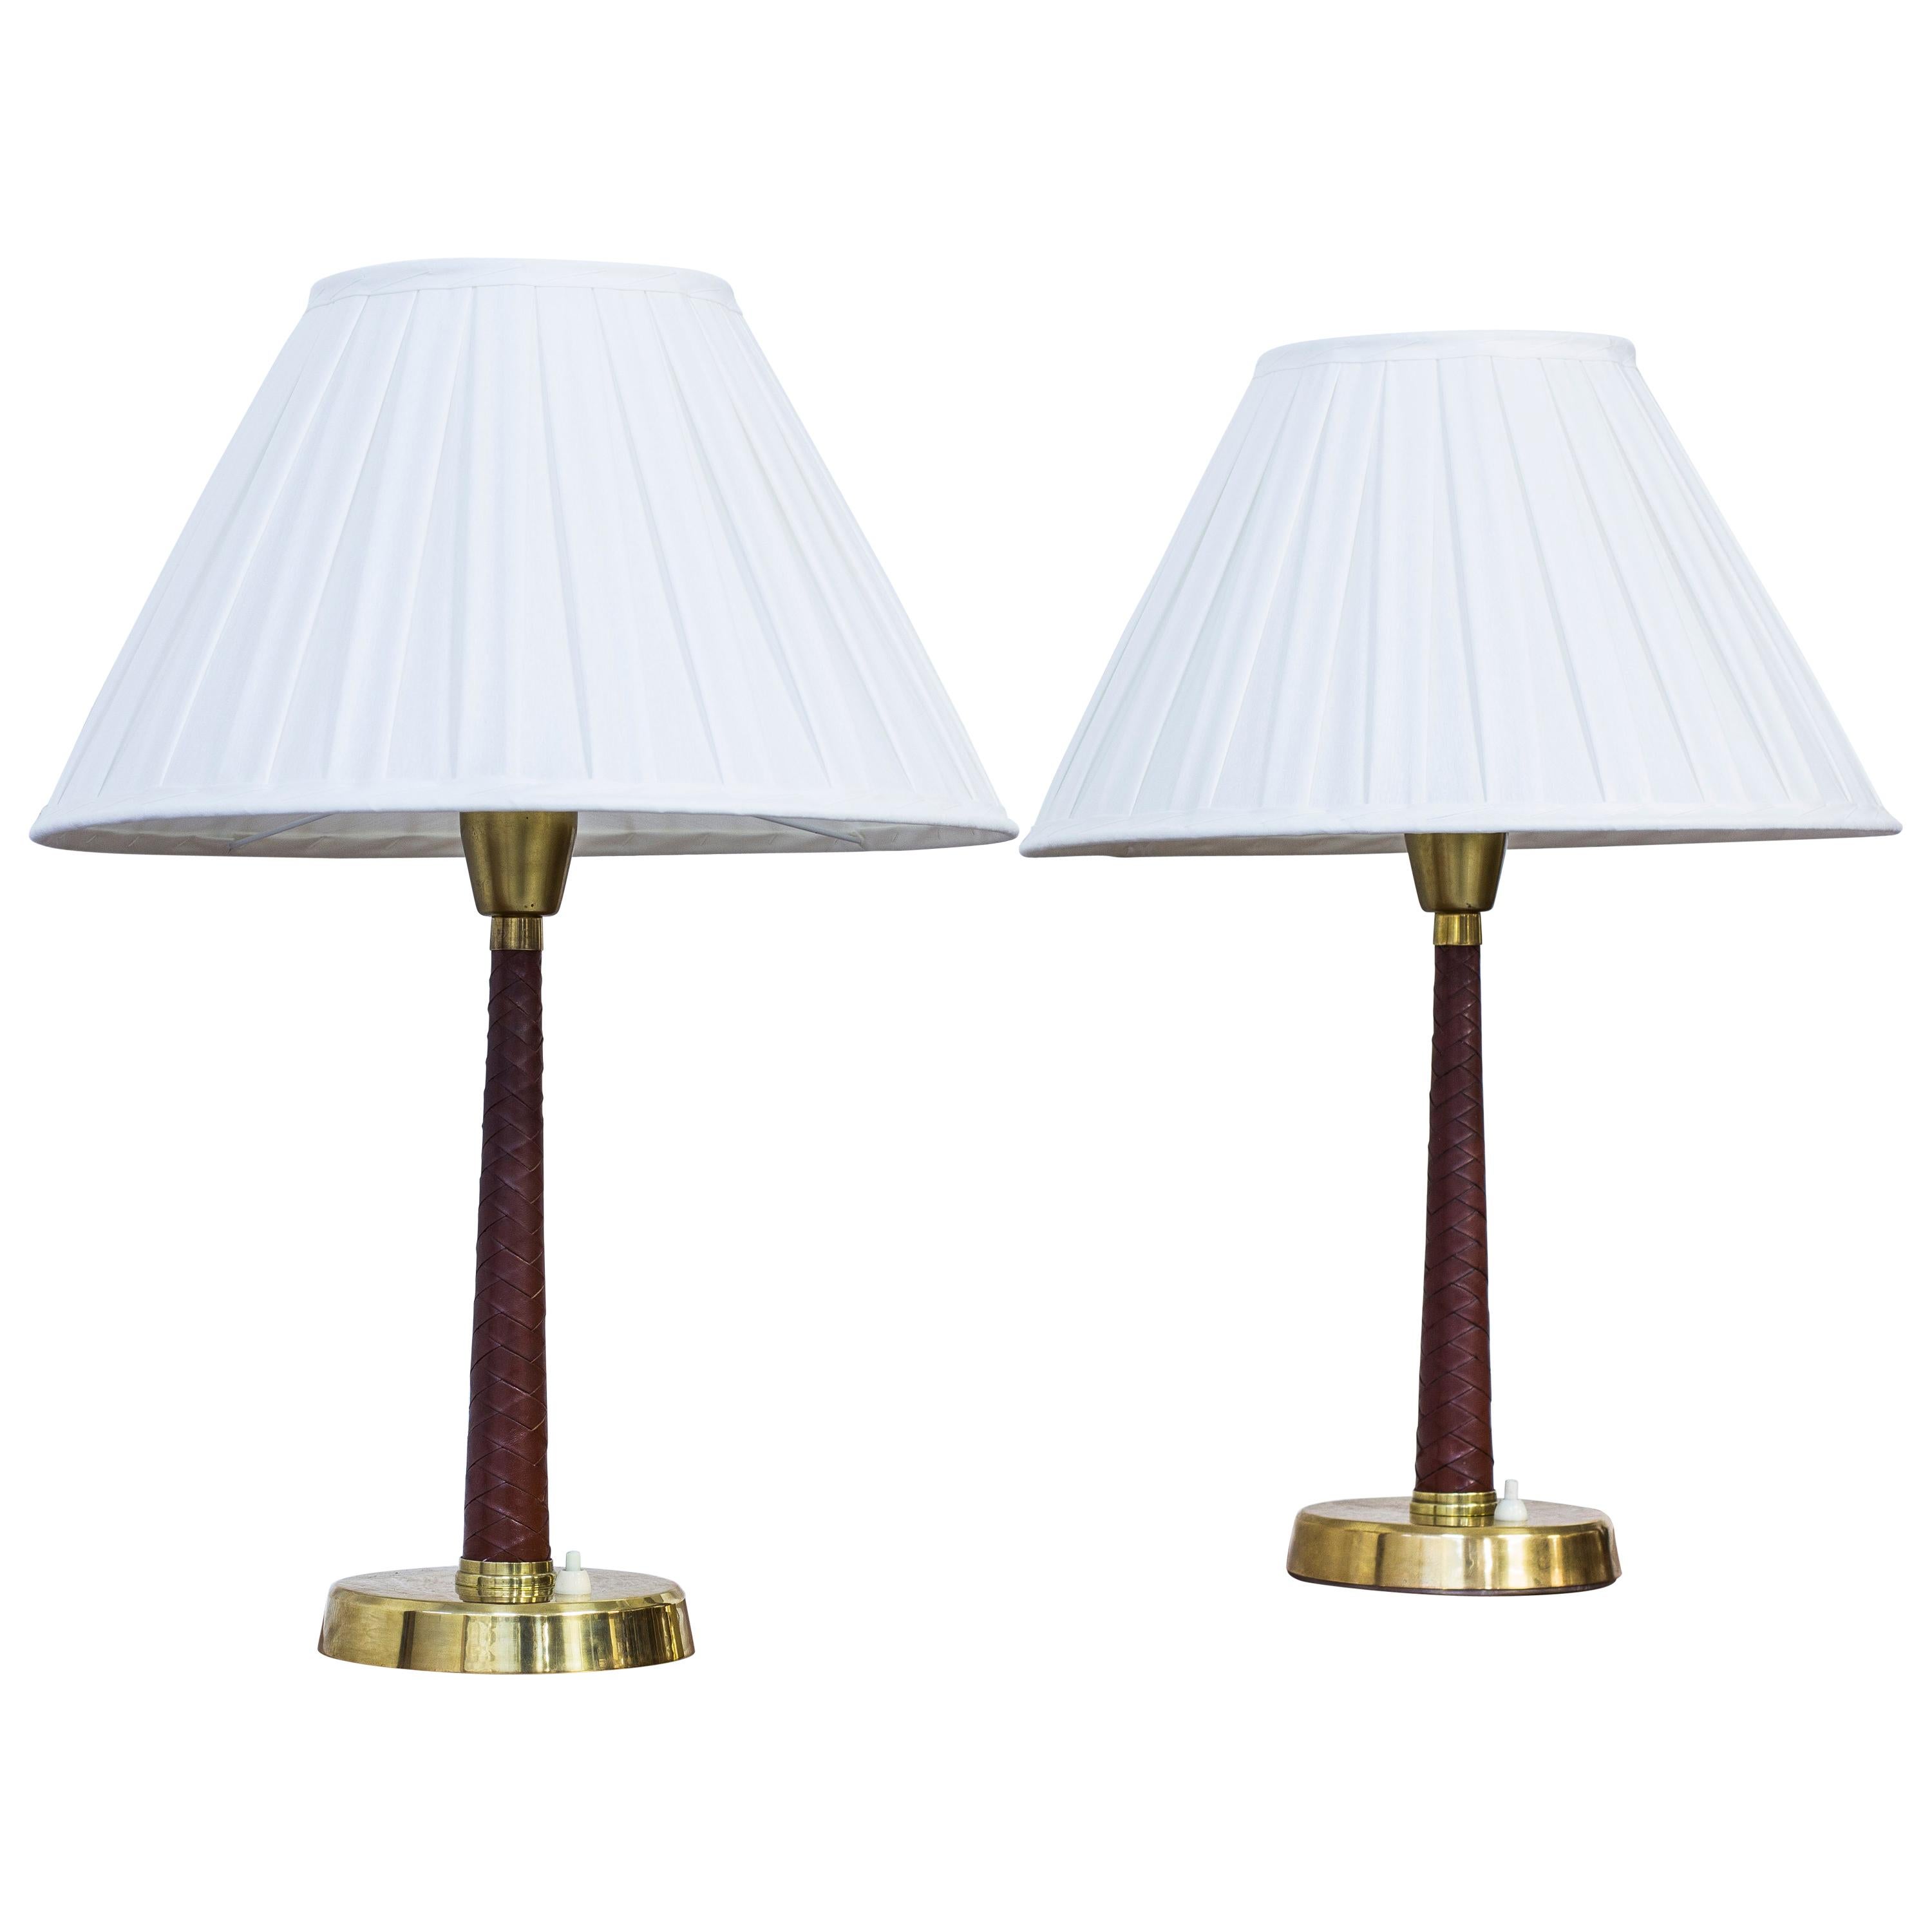 Pair of Table Lamps "701" by Hans Bergström for Ateljé Lyktan, Sweden, 1940s